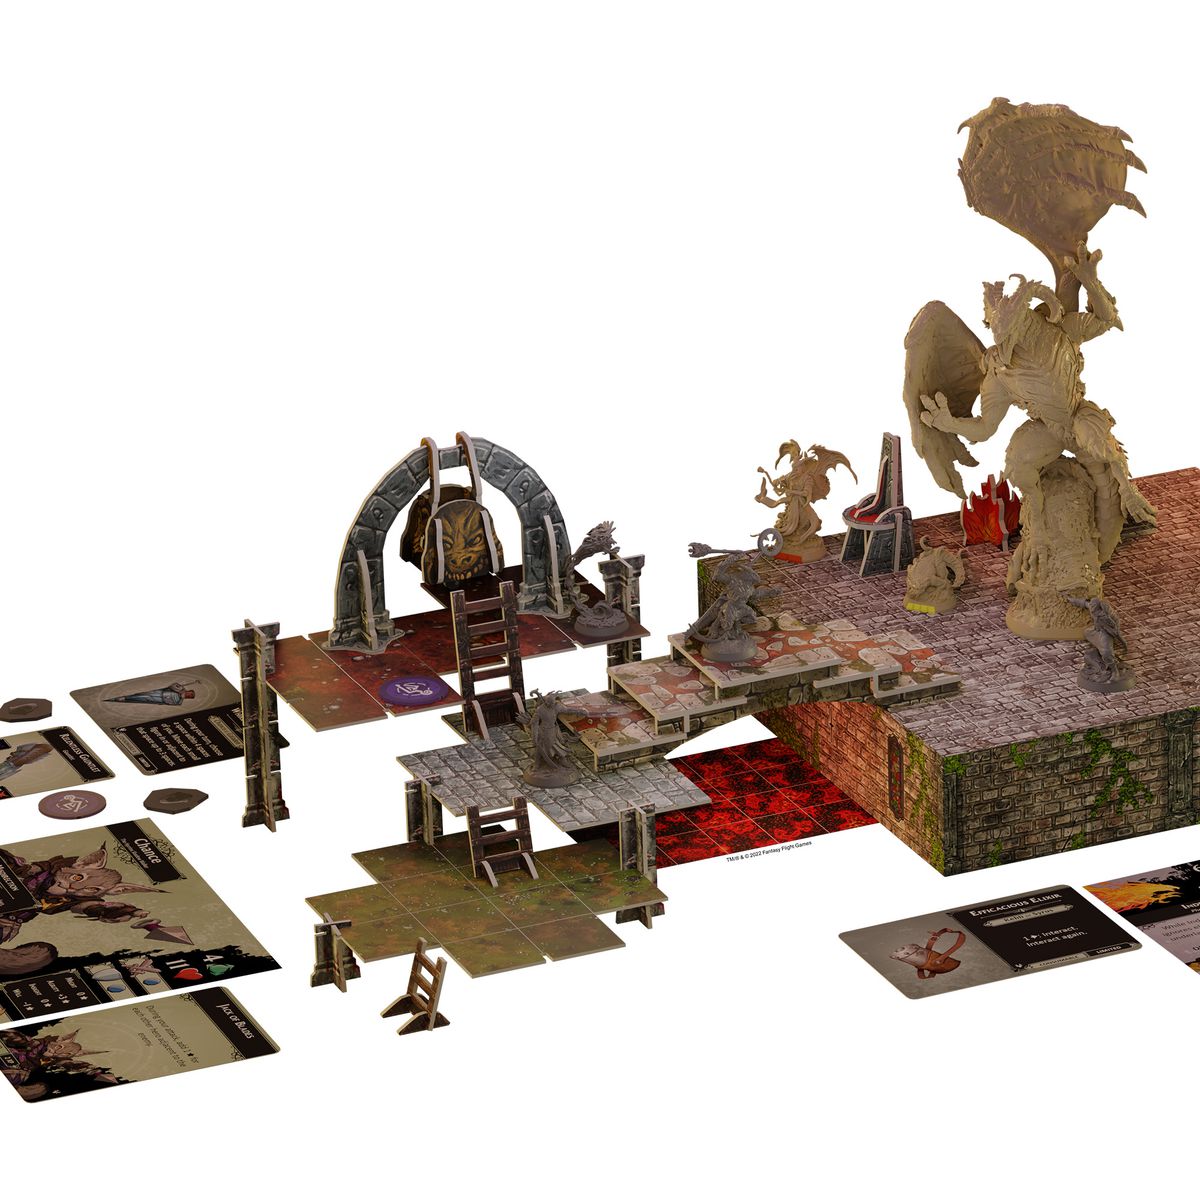 A square version of the render of the game components for Descent Act 2: The Betrayer’s War.